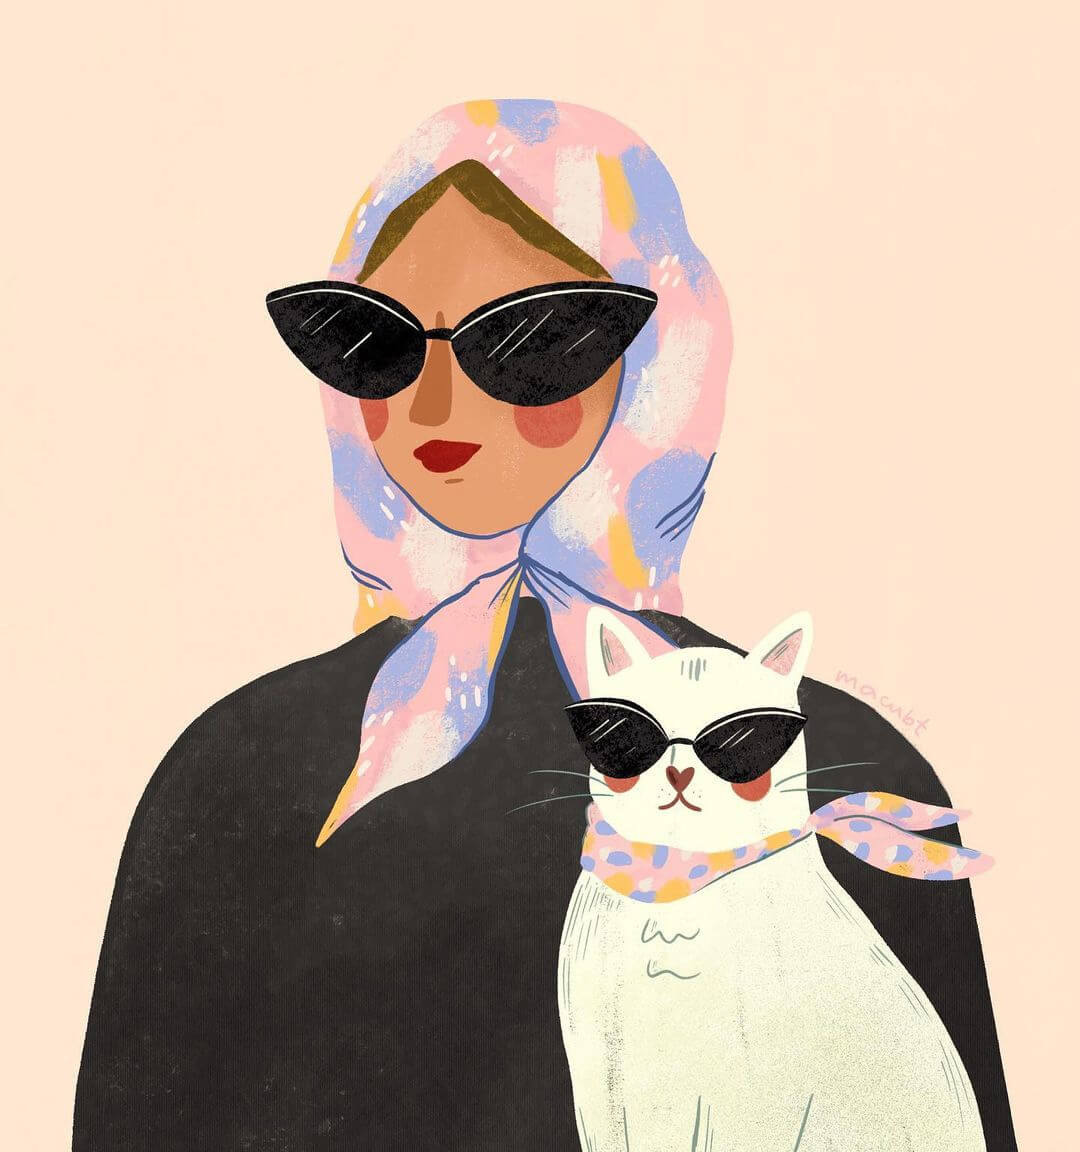 Girl and cat illustration by Macu Barreto